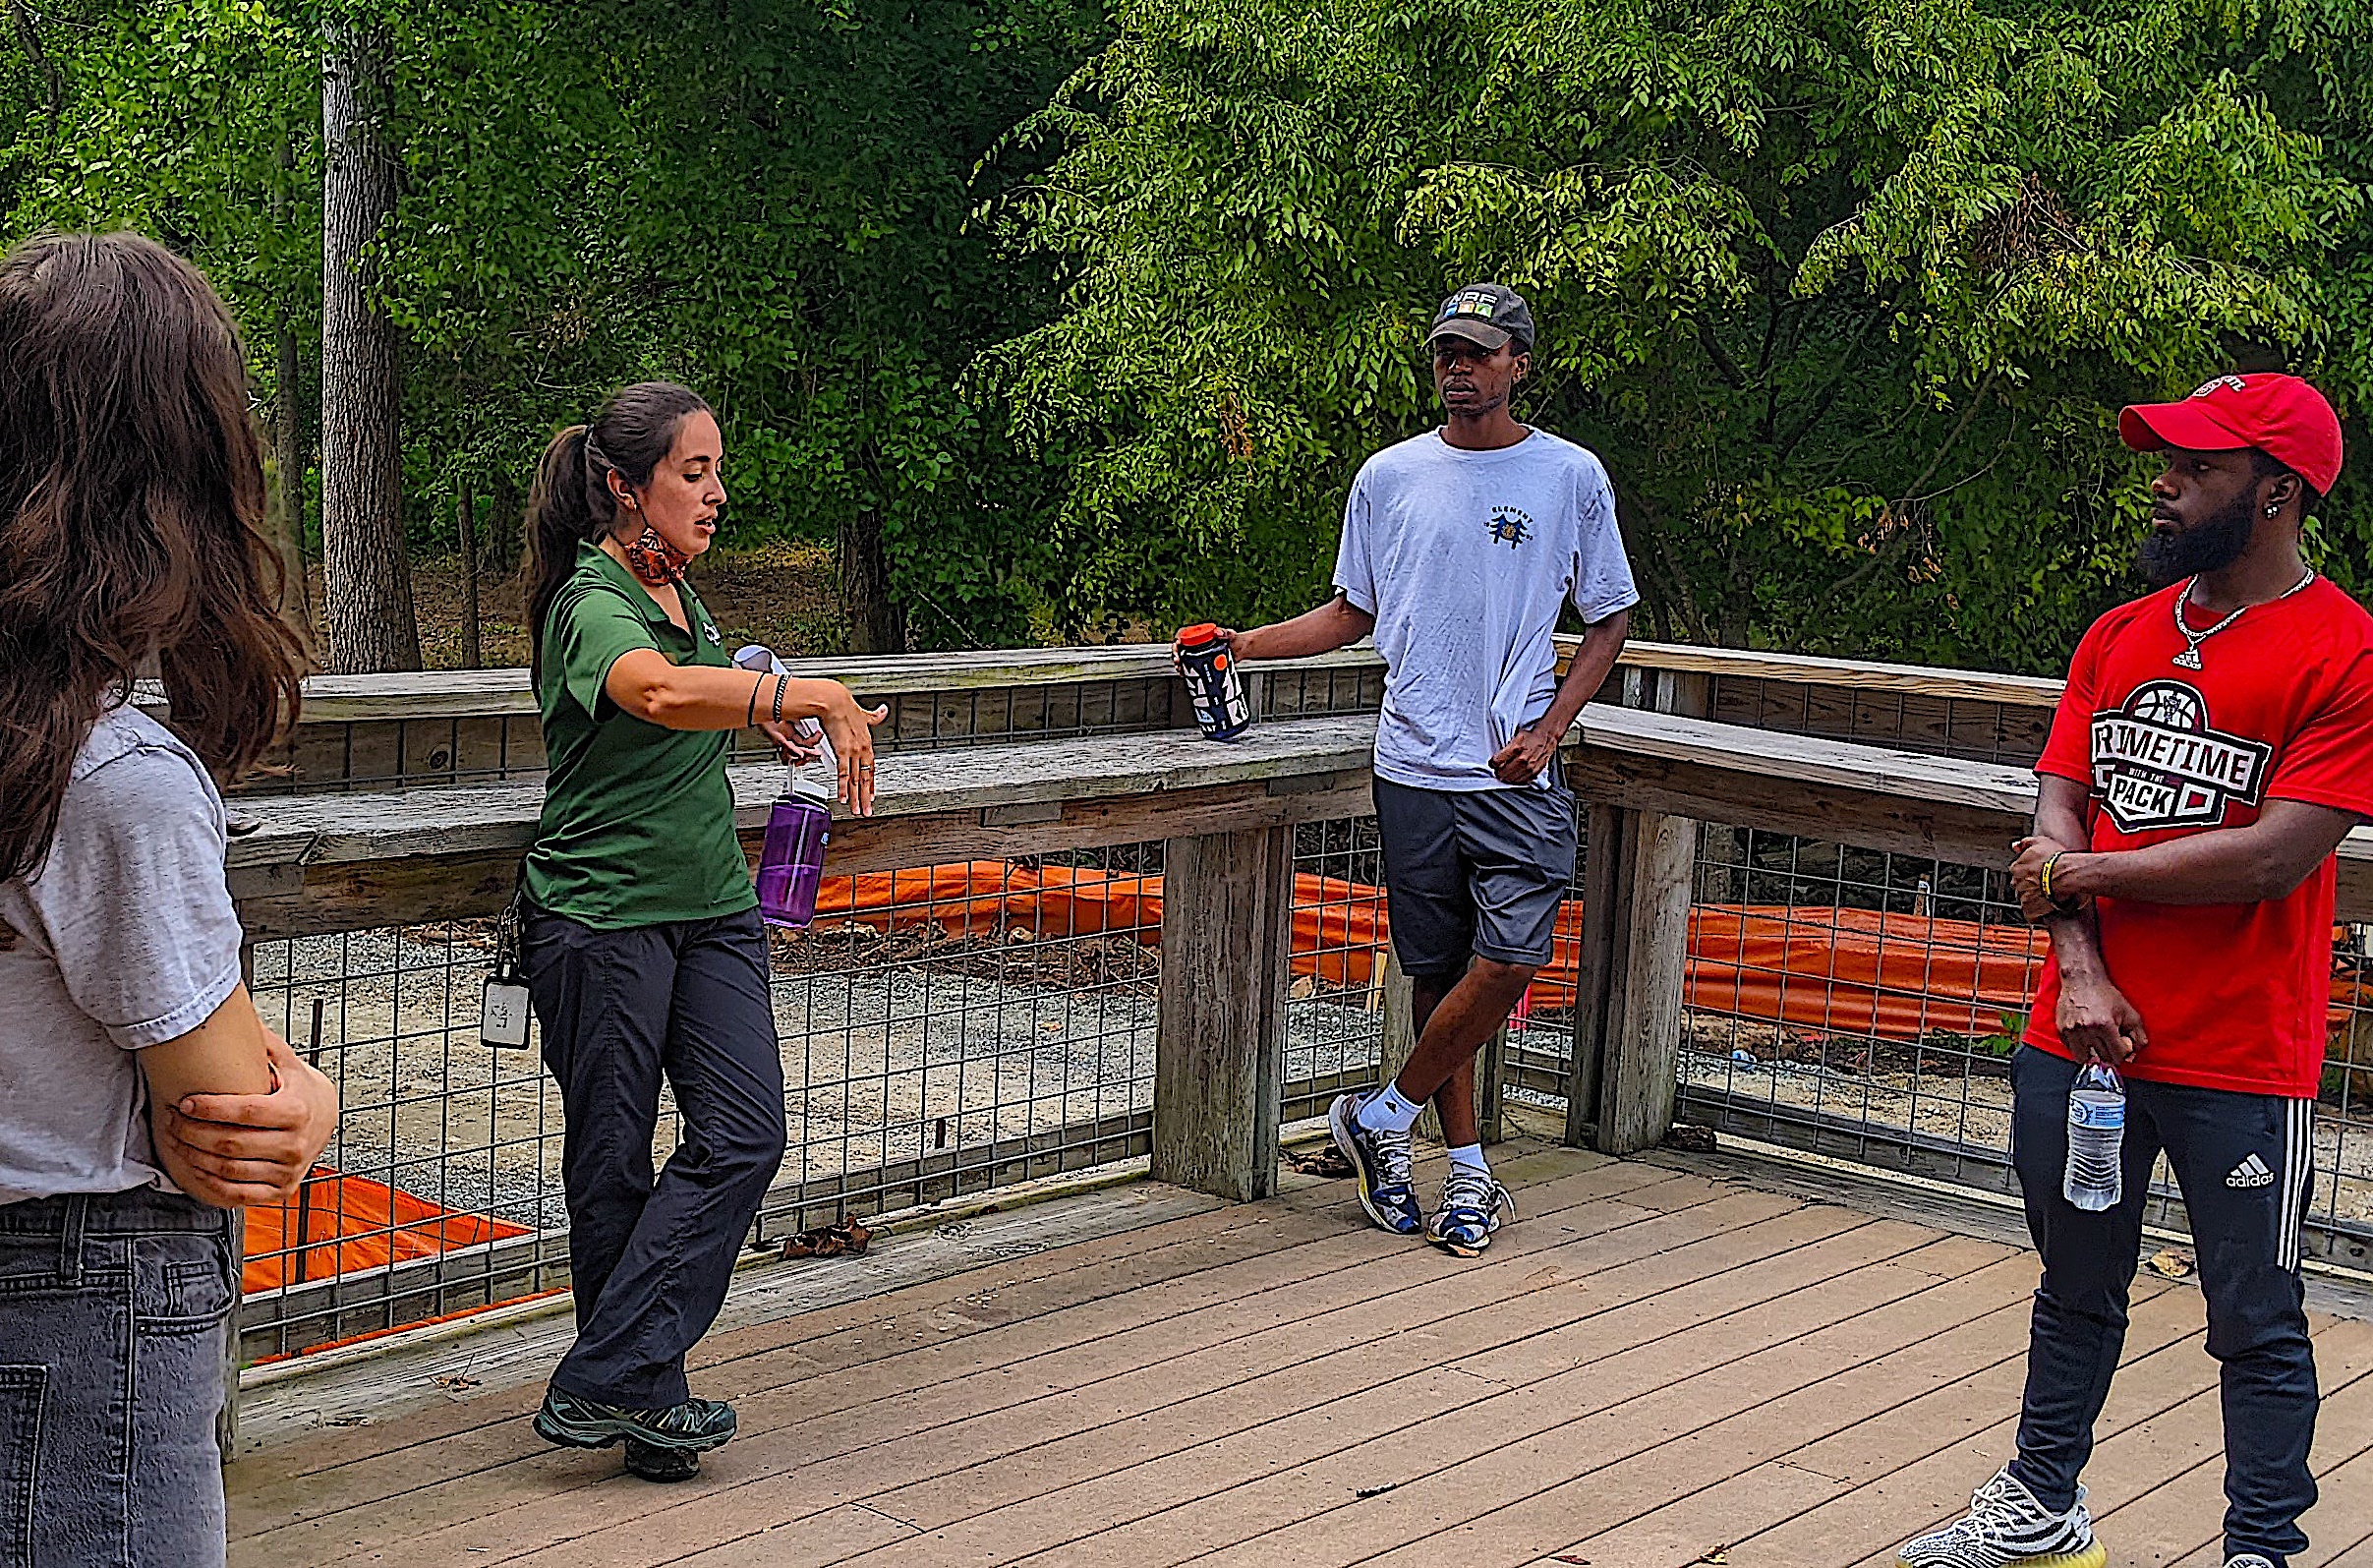 image: Youth conservation job training participants learn about environmental research opportunities from Liani Yirka (above), assistant director of Walnut Creek Wetland Park. Credit: Christy Perrin.